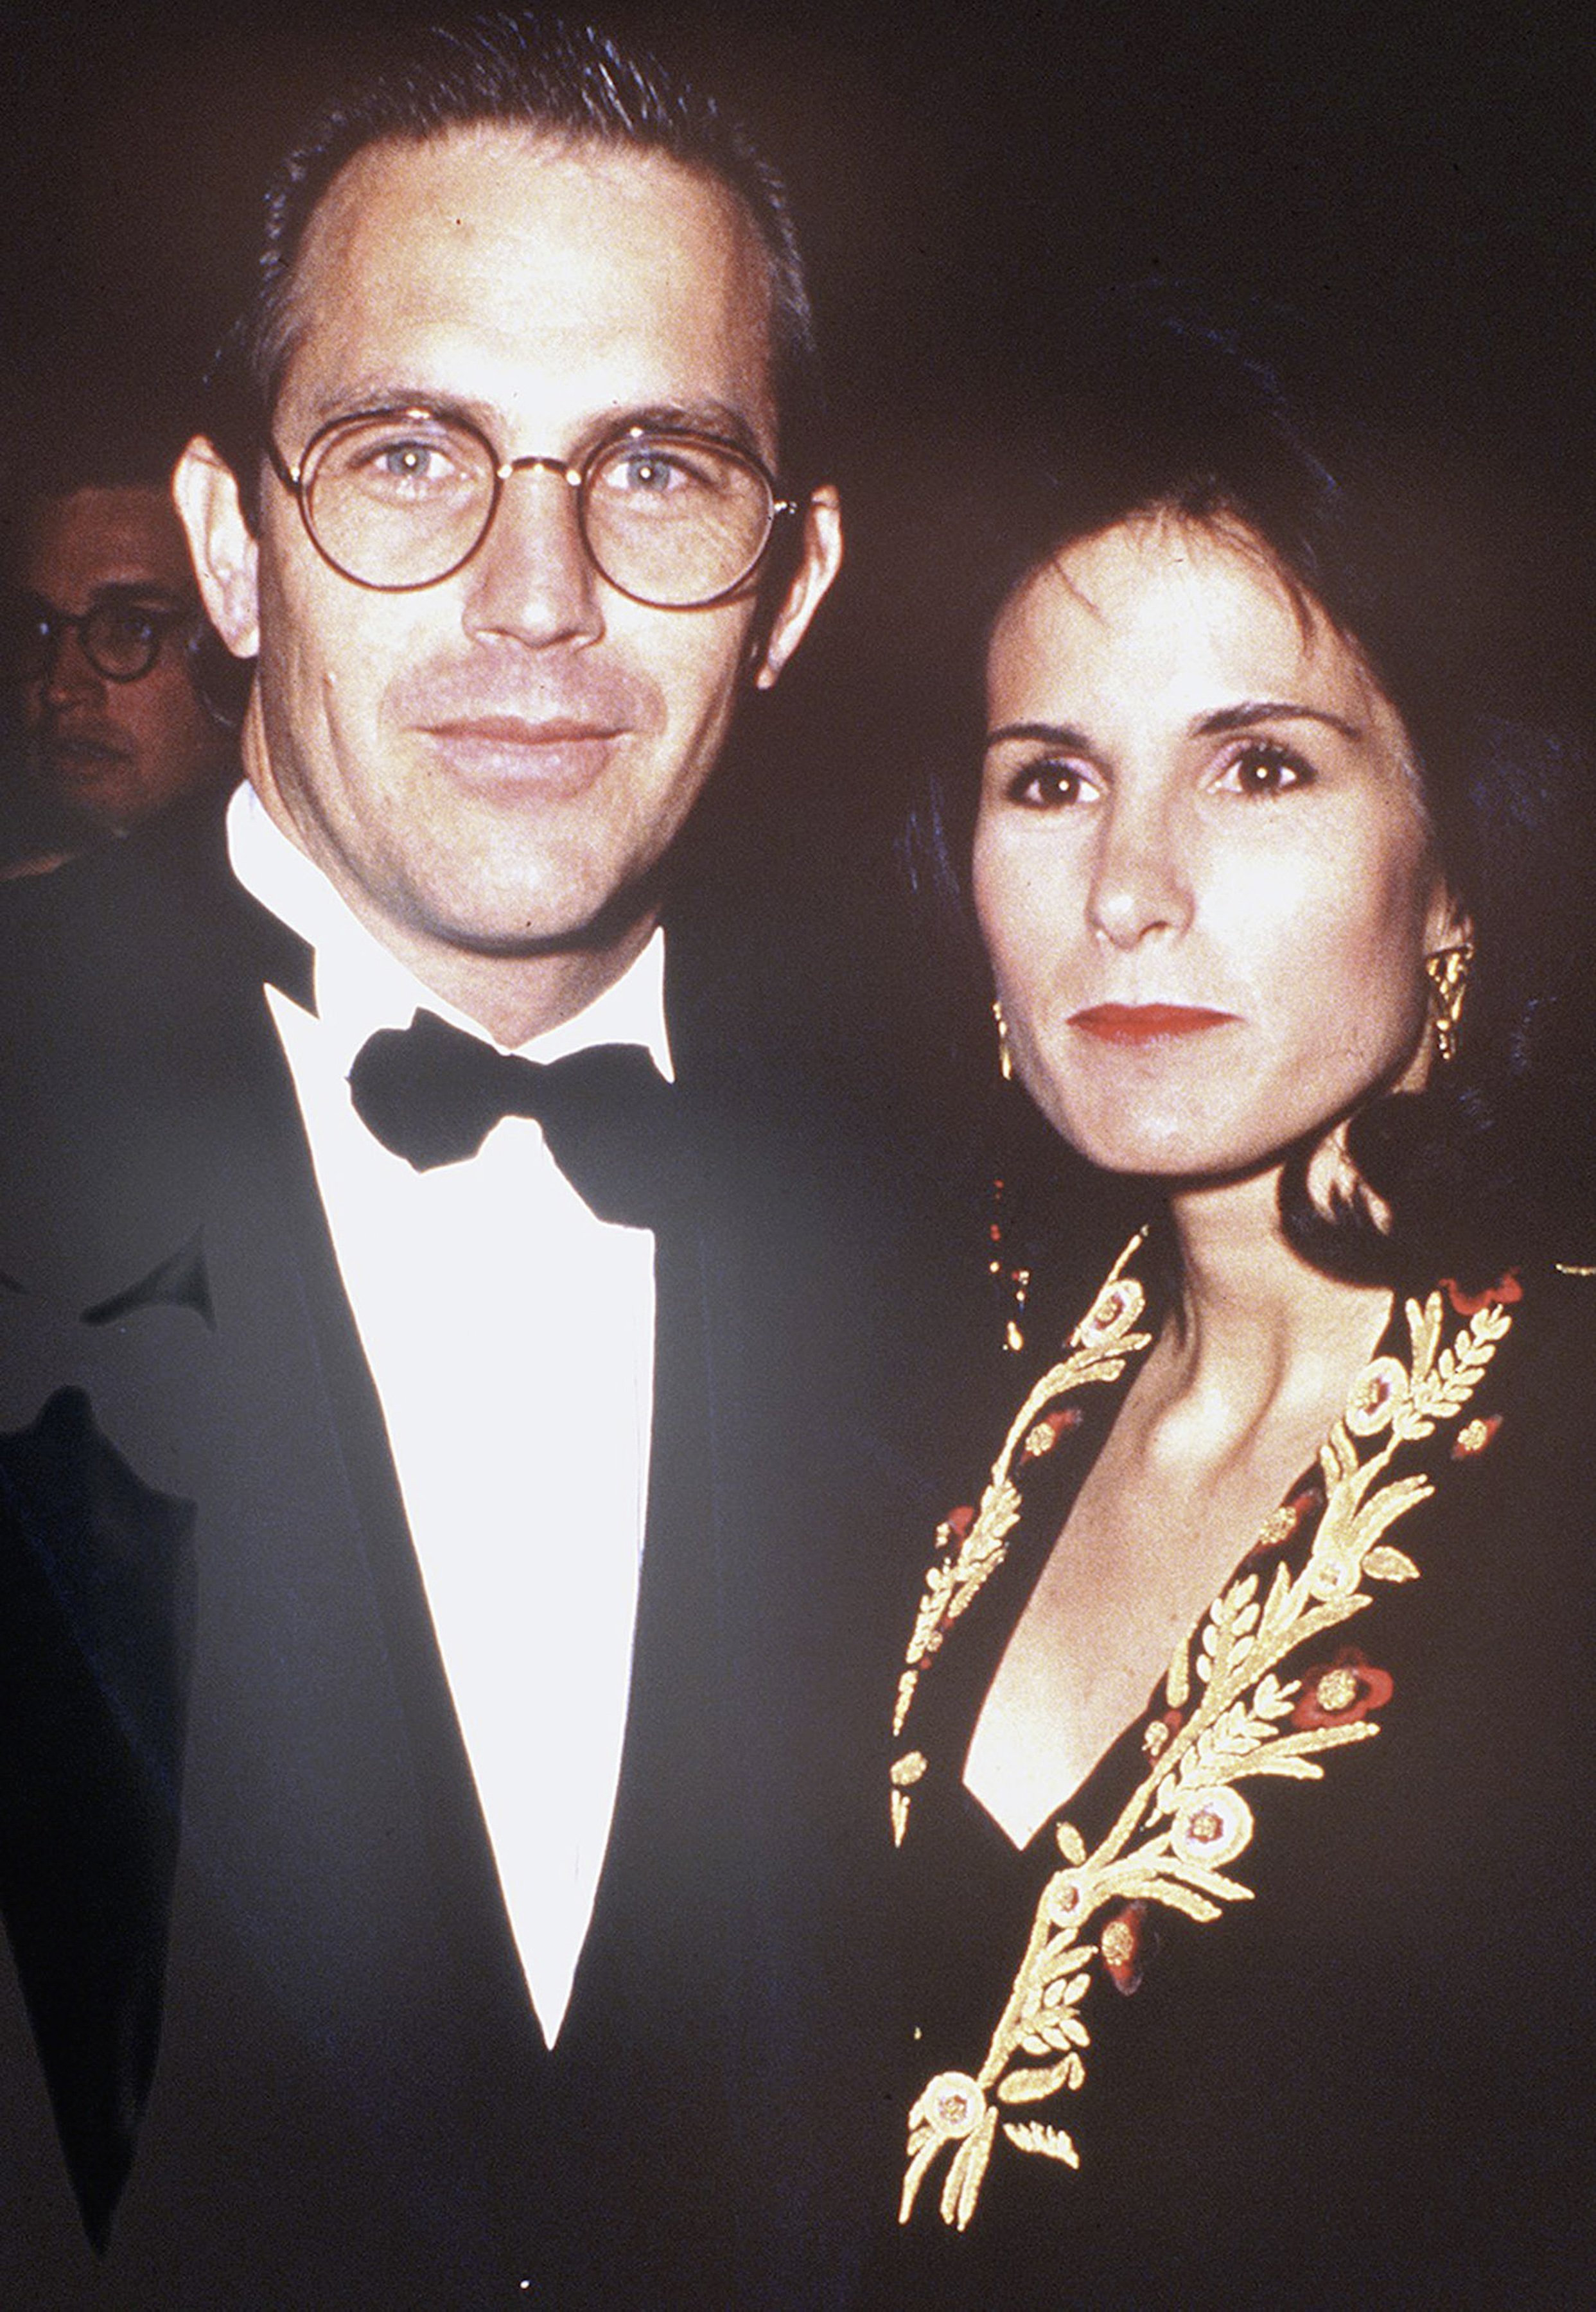 Cindy Costner and Kevin Costner at the 'Dances With Wolves' Los Angeles Premiere, November 1990 | Photo: GettyImages